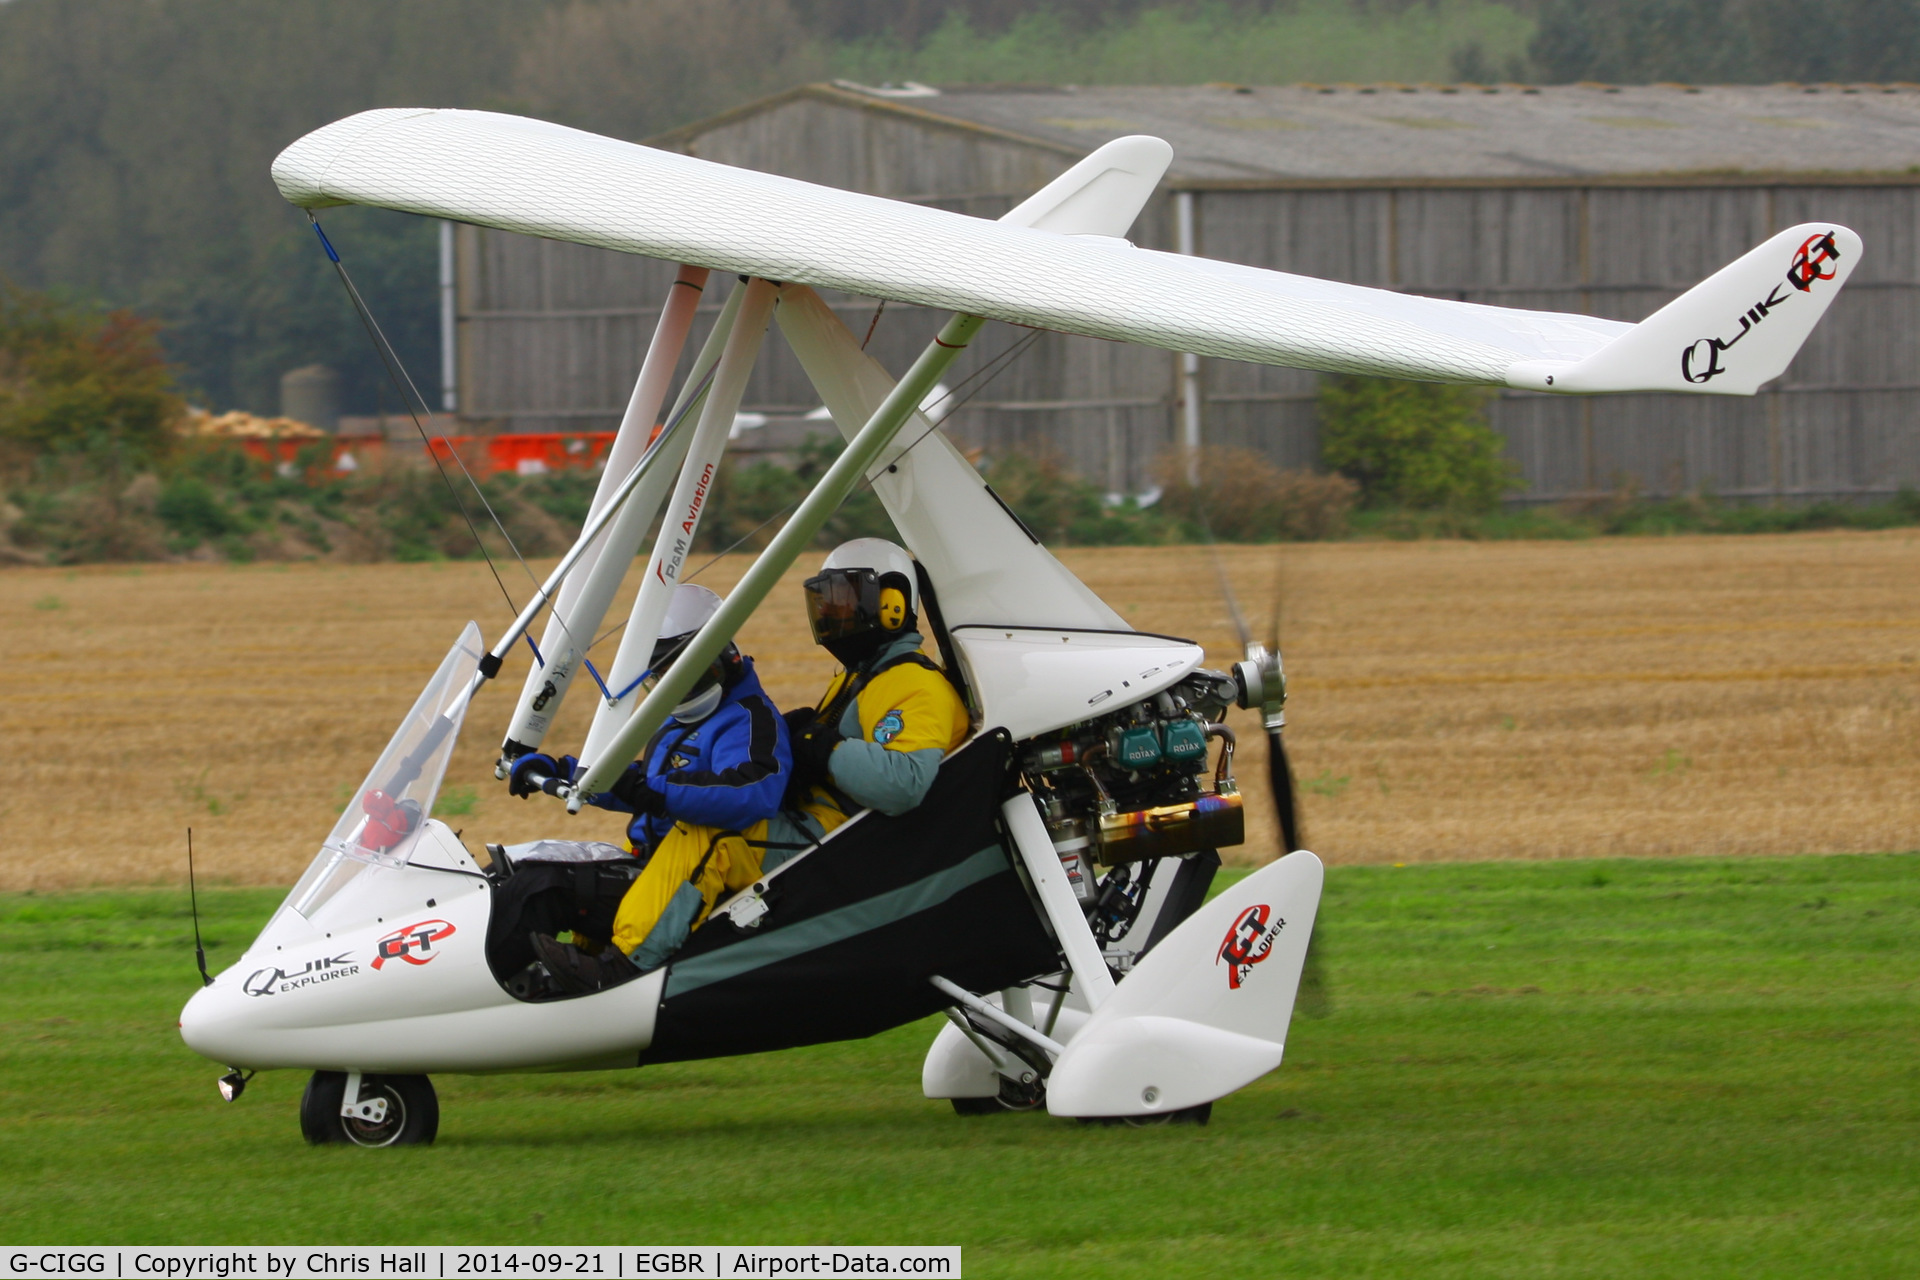 G-CIGG, 2014 P&M Aviation Quik GTR C/N 8690, at Breighton's Heli Fly-in, 2014